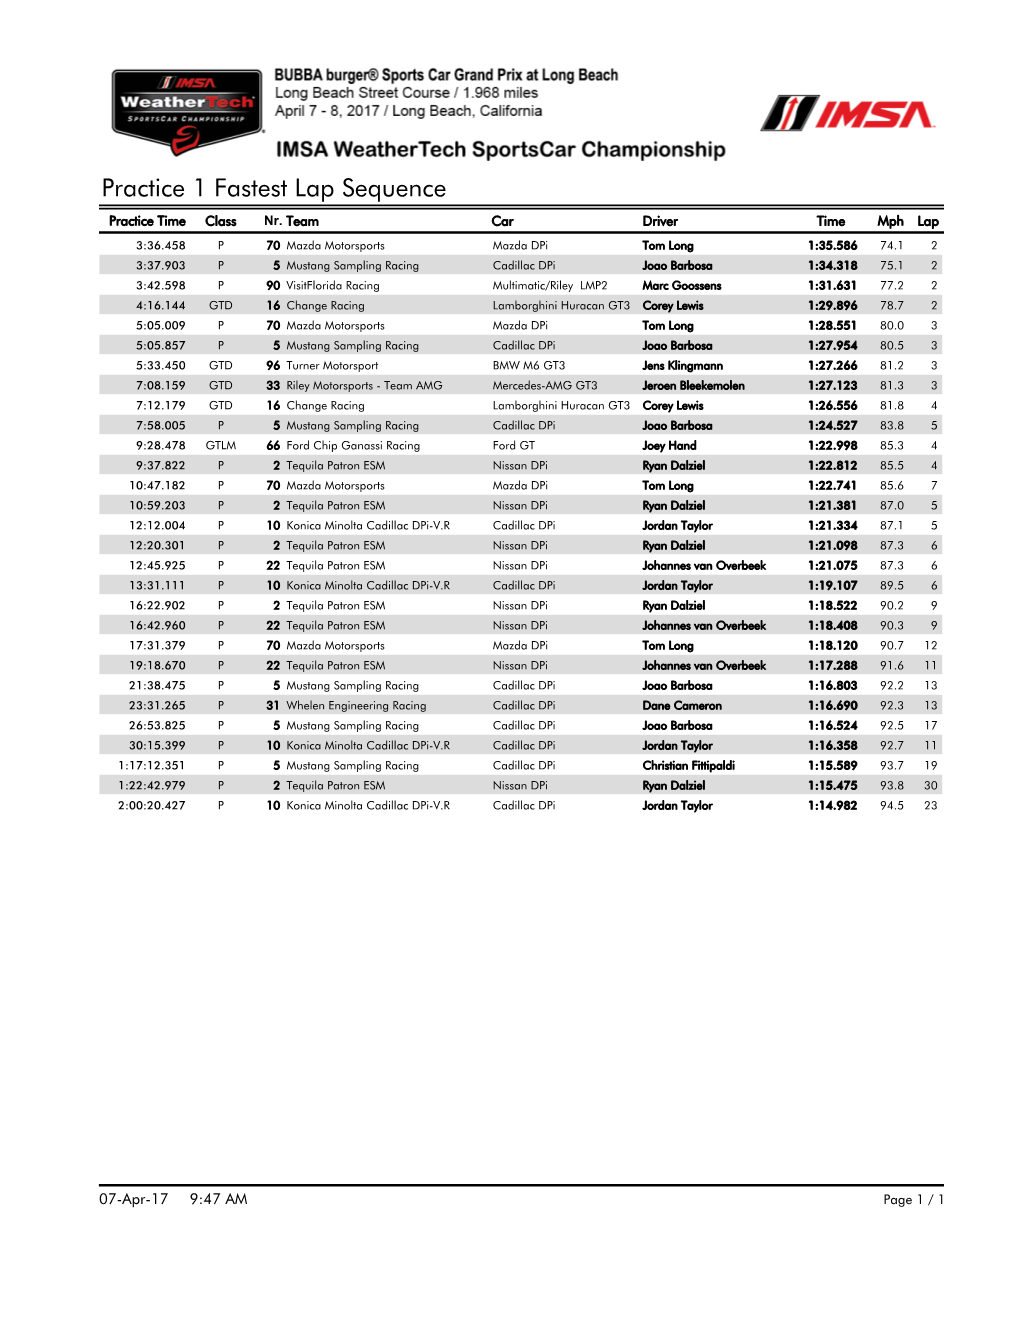 Practice 1 Fastest Lap Sequence Practice Time Class Nr